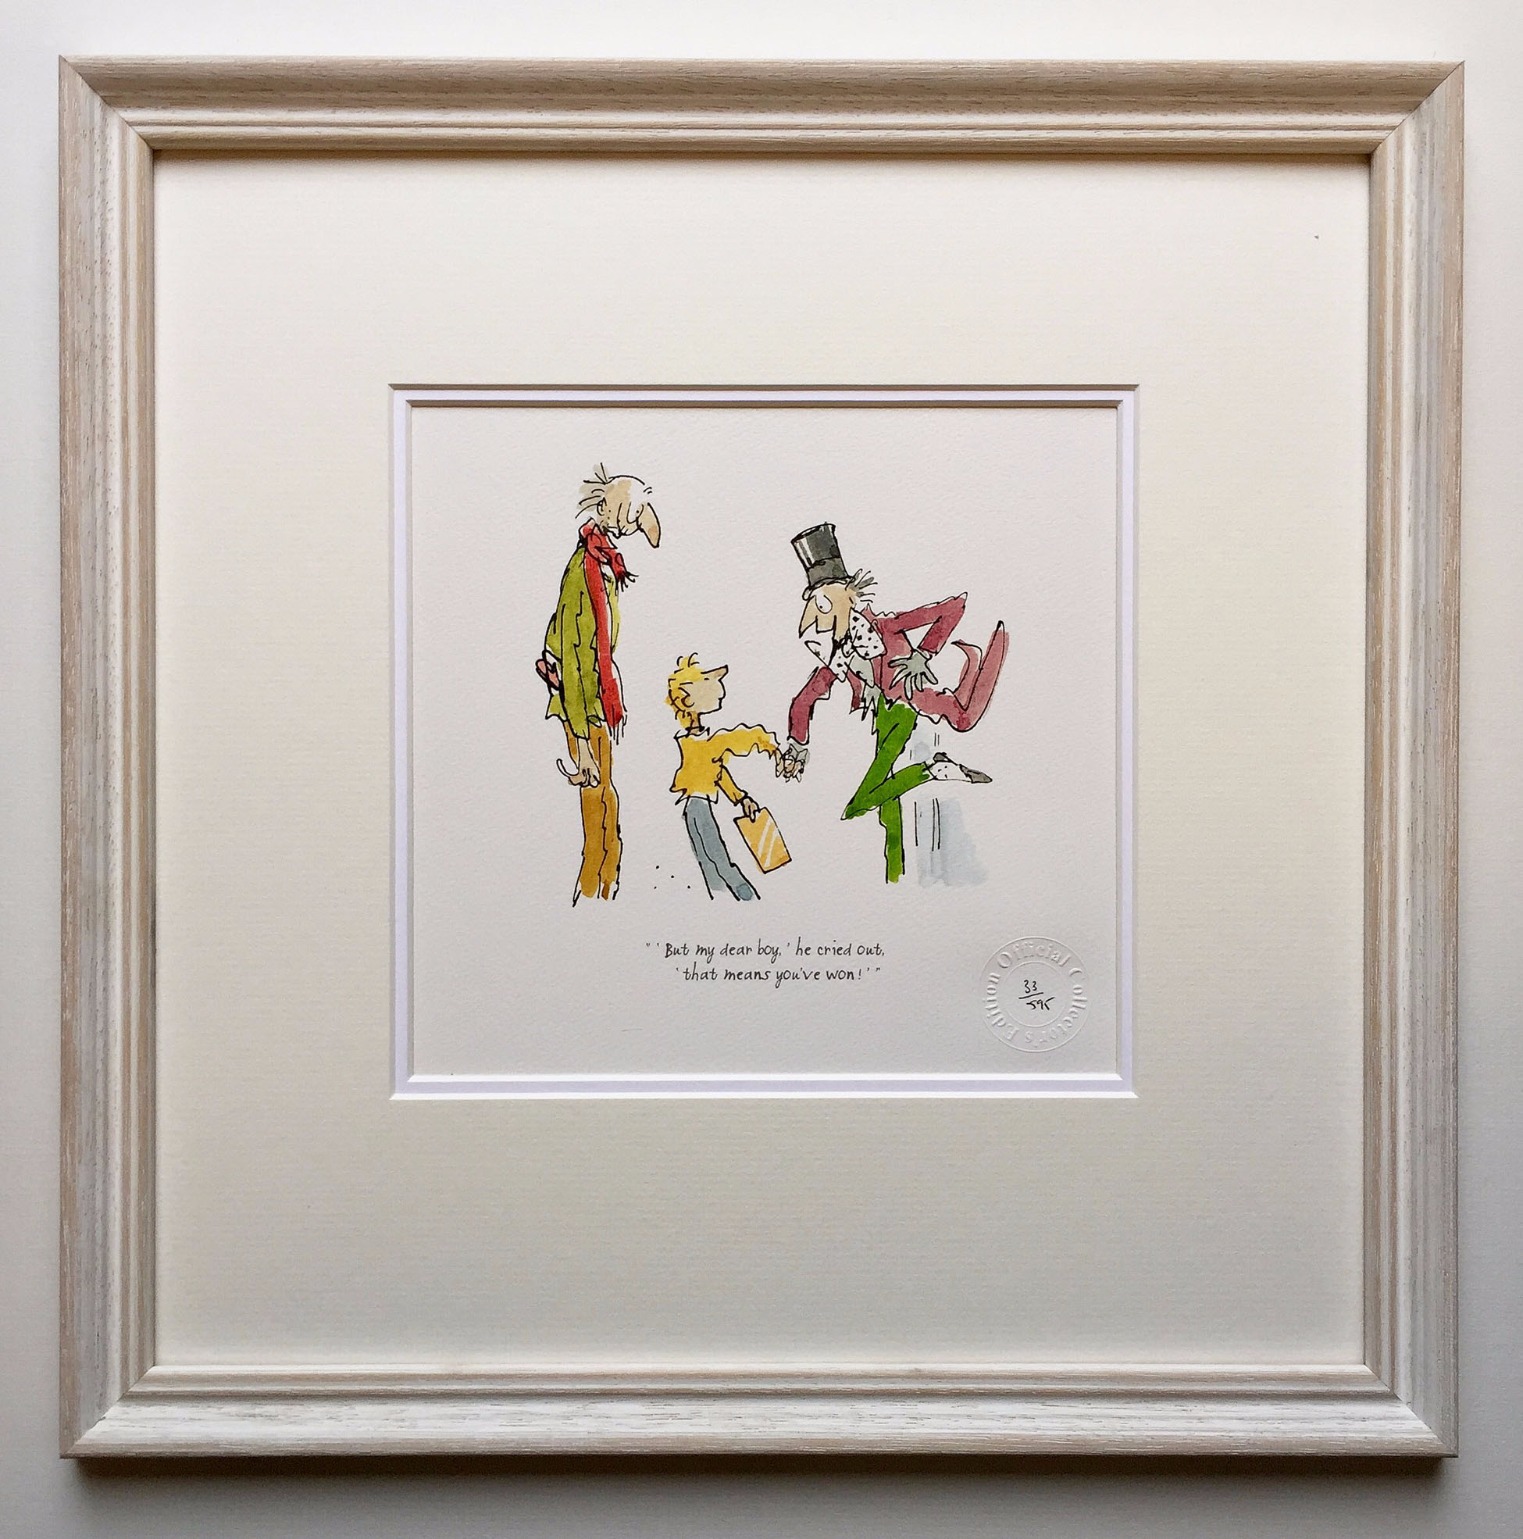 That Means You've Won by Quentin Blake